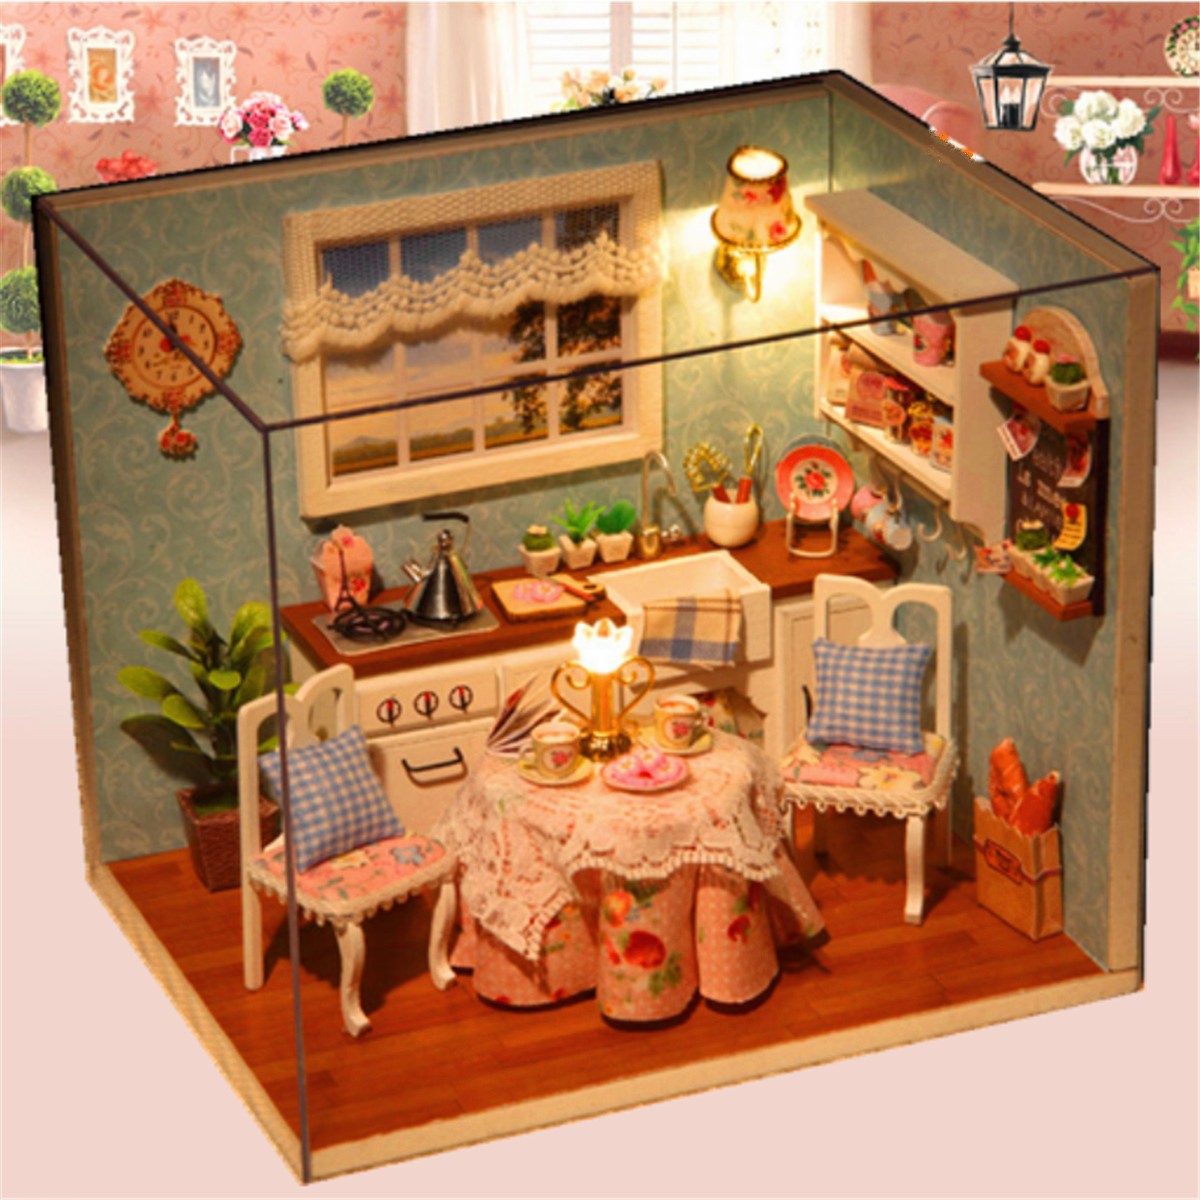 Cuteroom Dollhouse Miniature Dining Room DIY Kit With Cover And LED